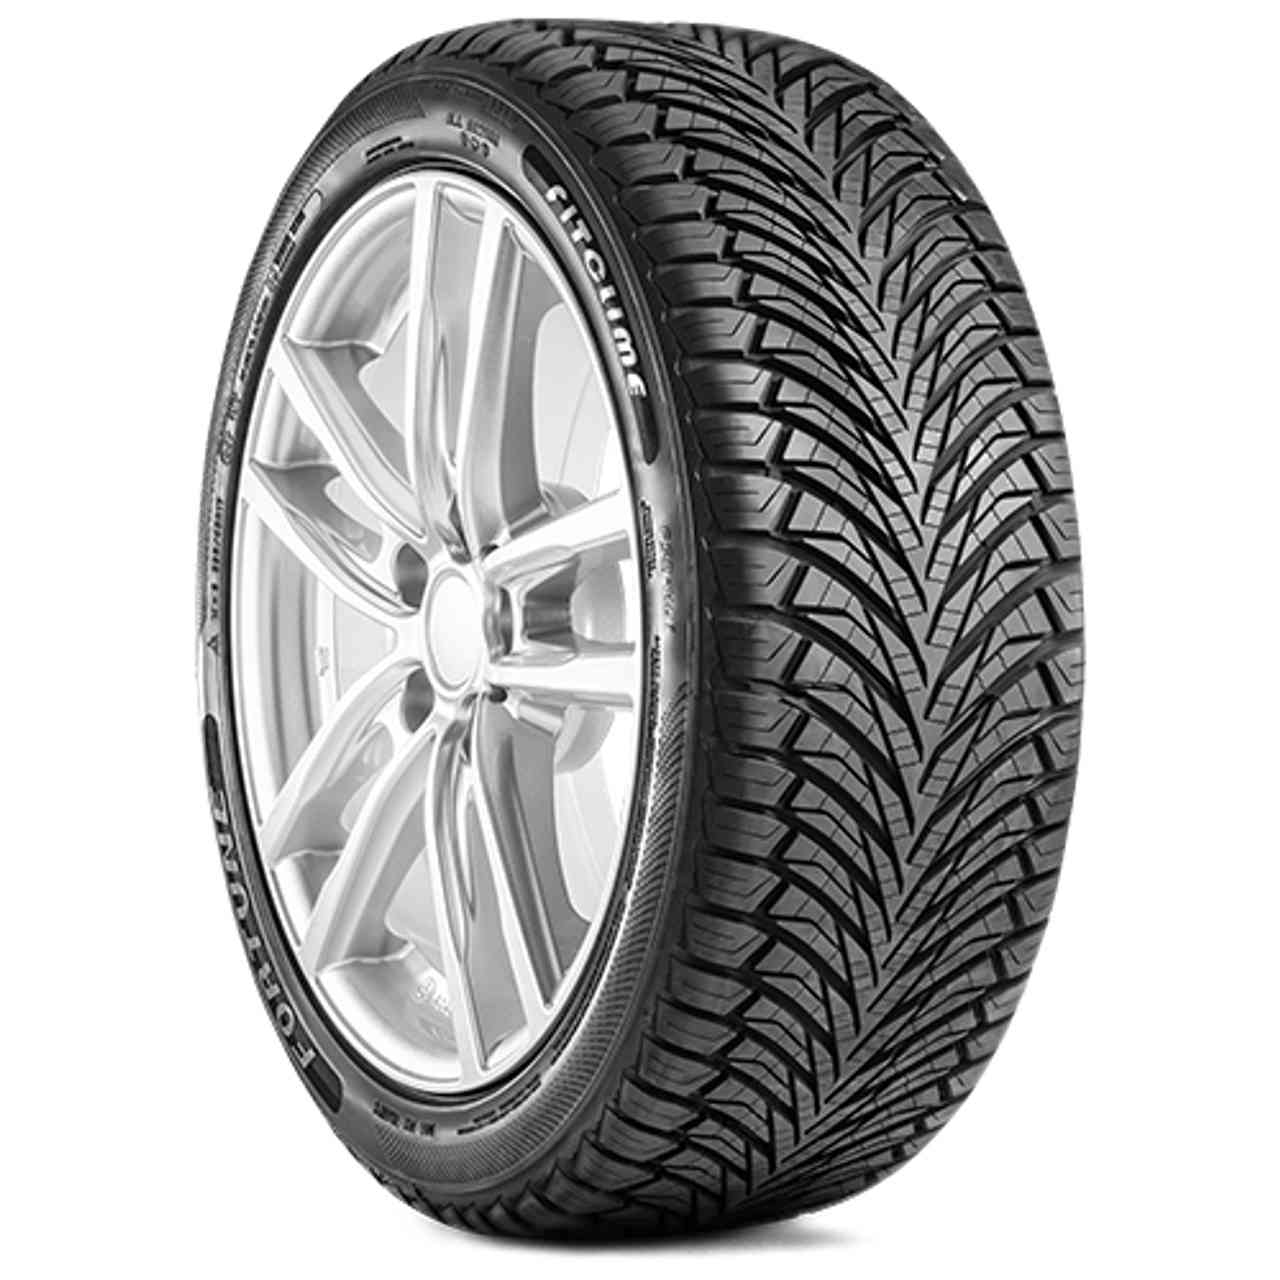 FORTUNE FITCLIME FSR-401 185/65R15 88H BSW